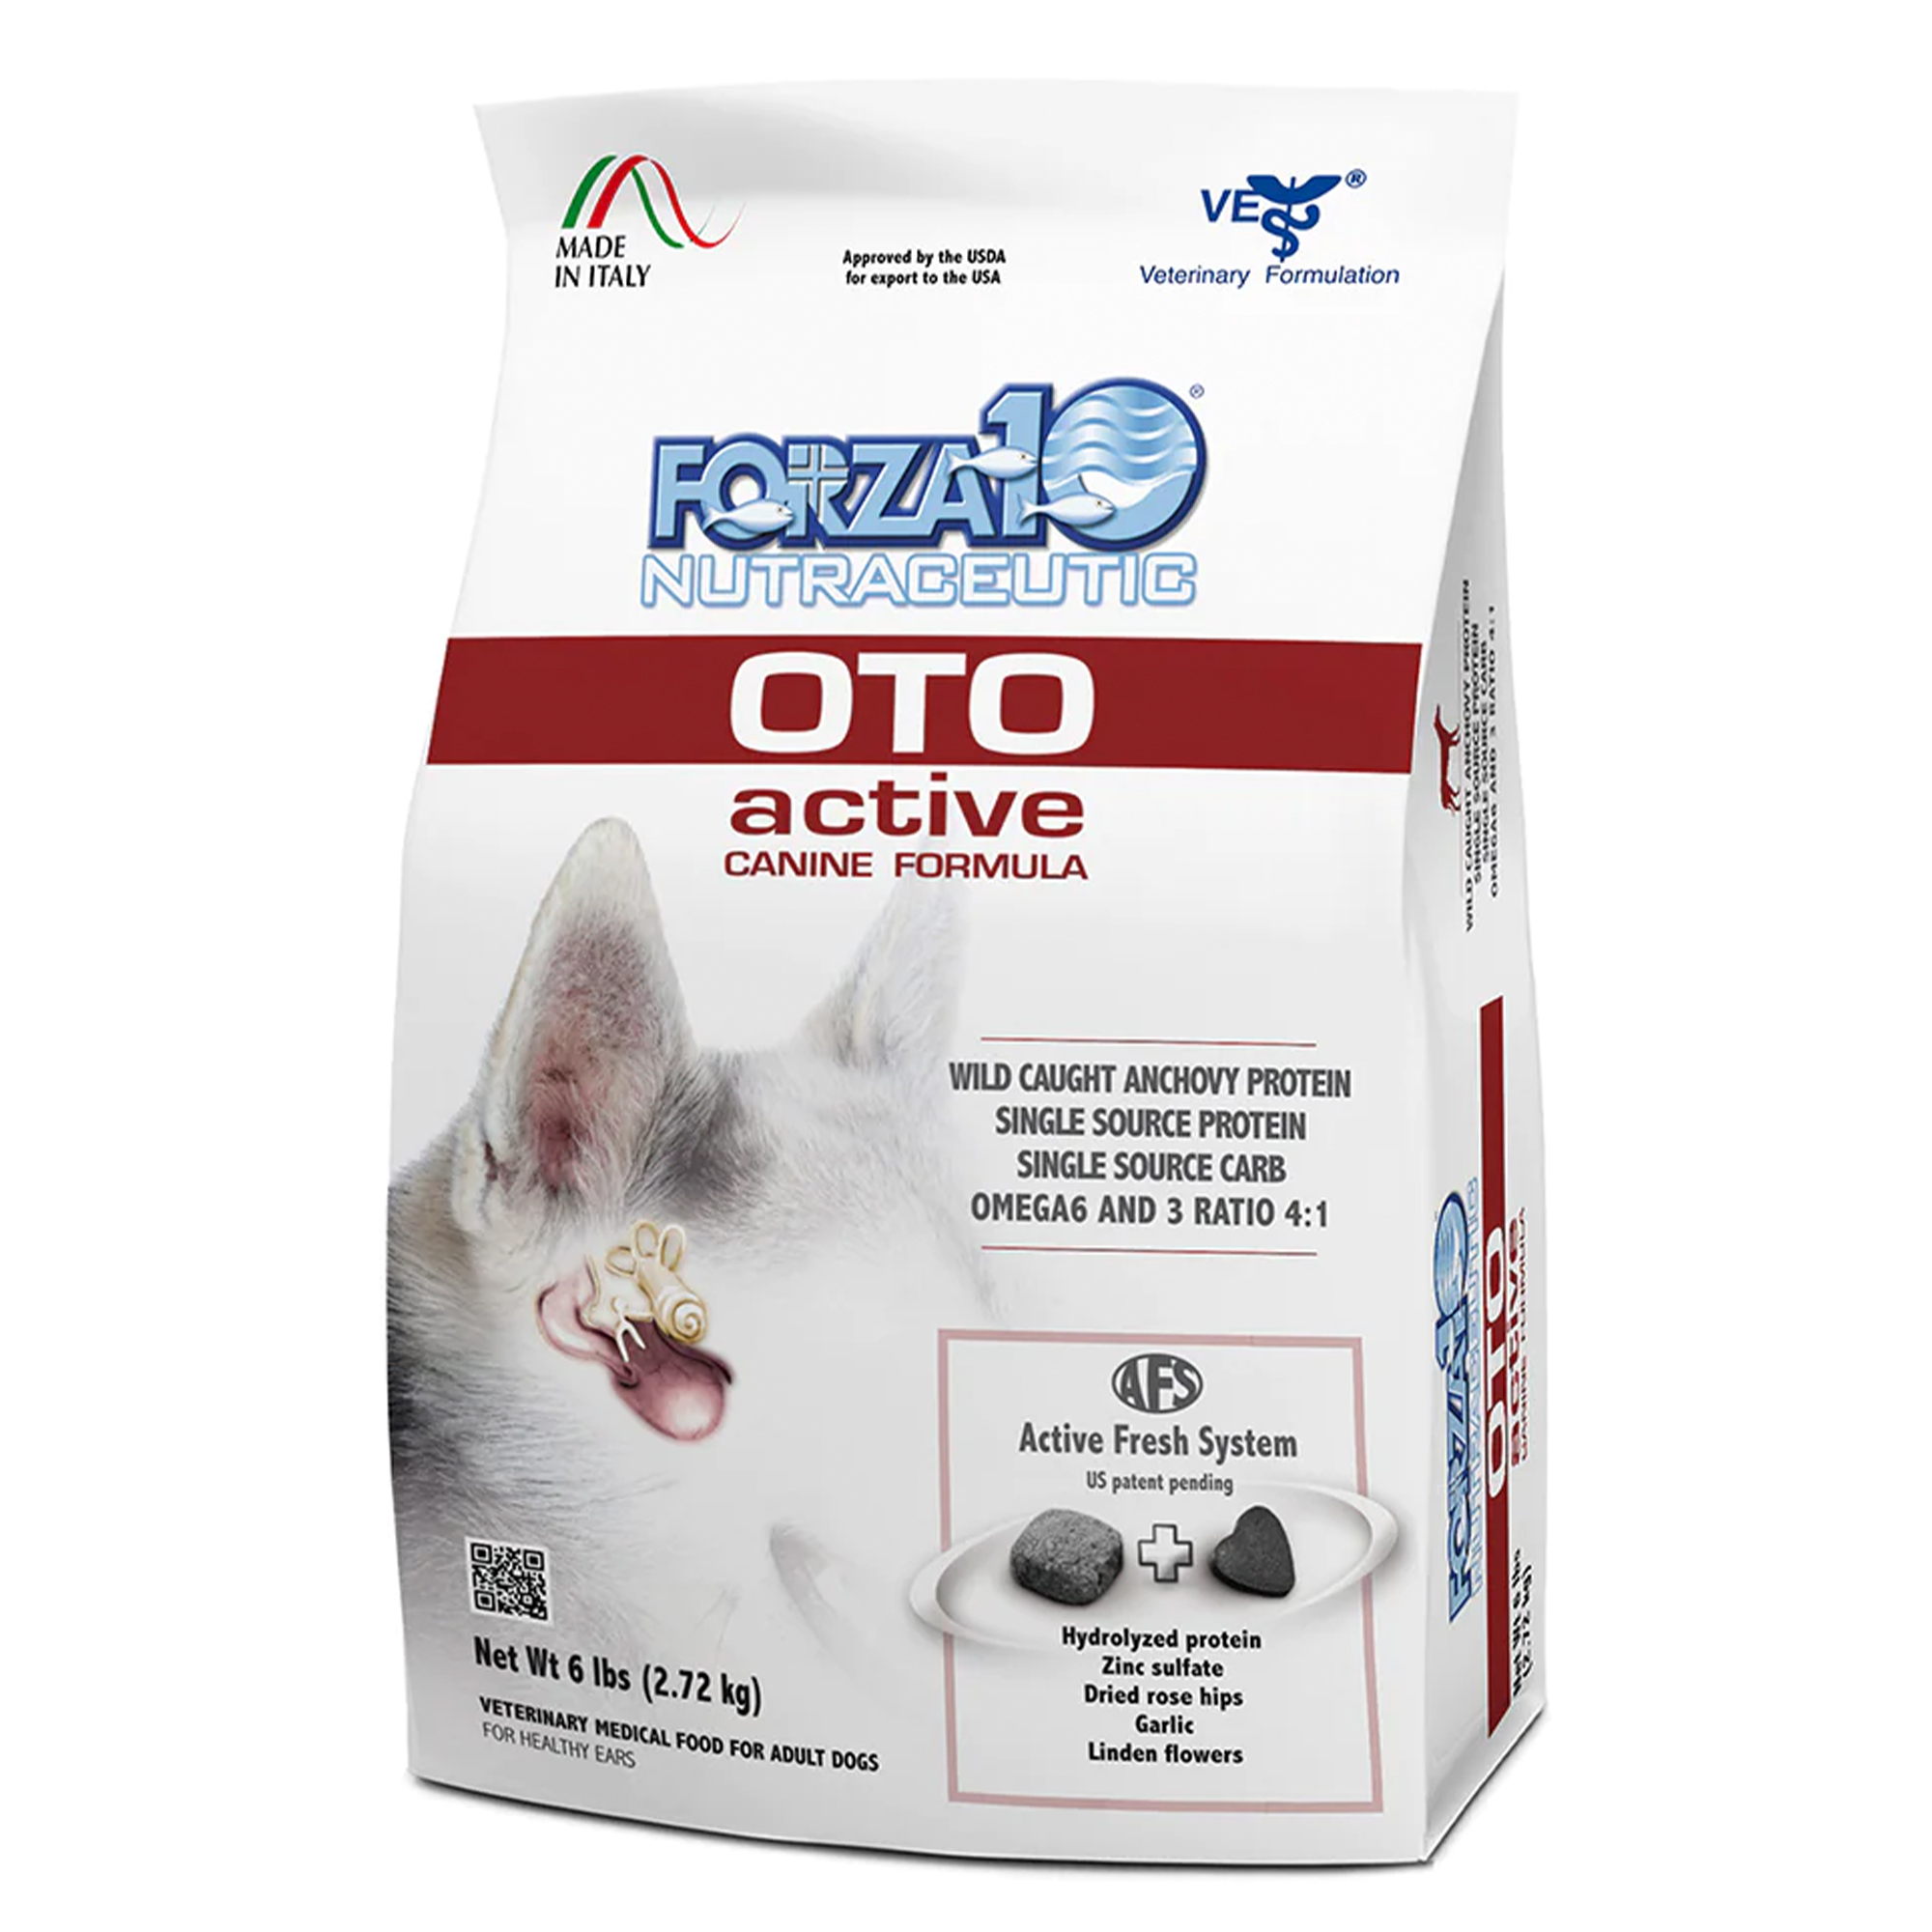 Forza10 Nutraceutic Active OTO Support Diet Dry Dog Food Usage